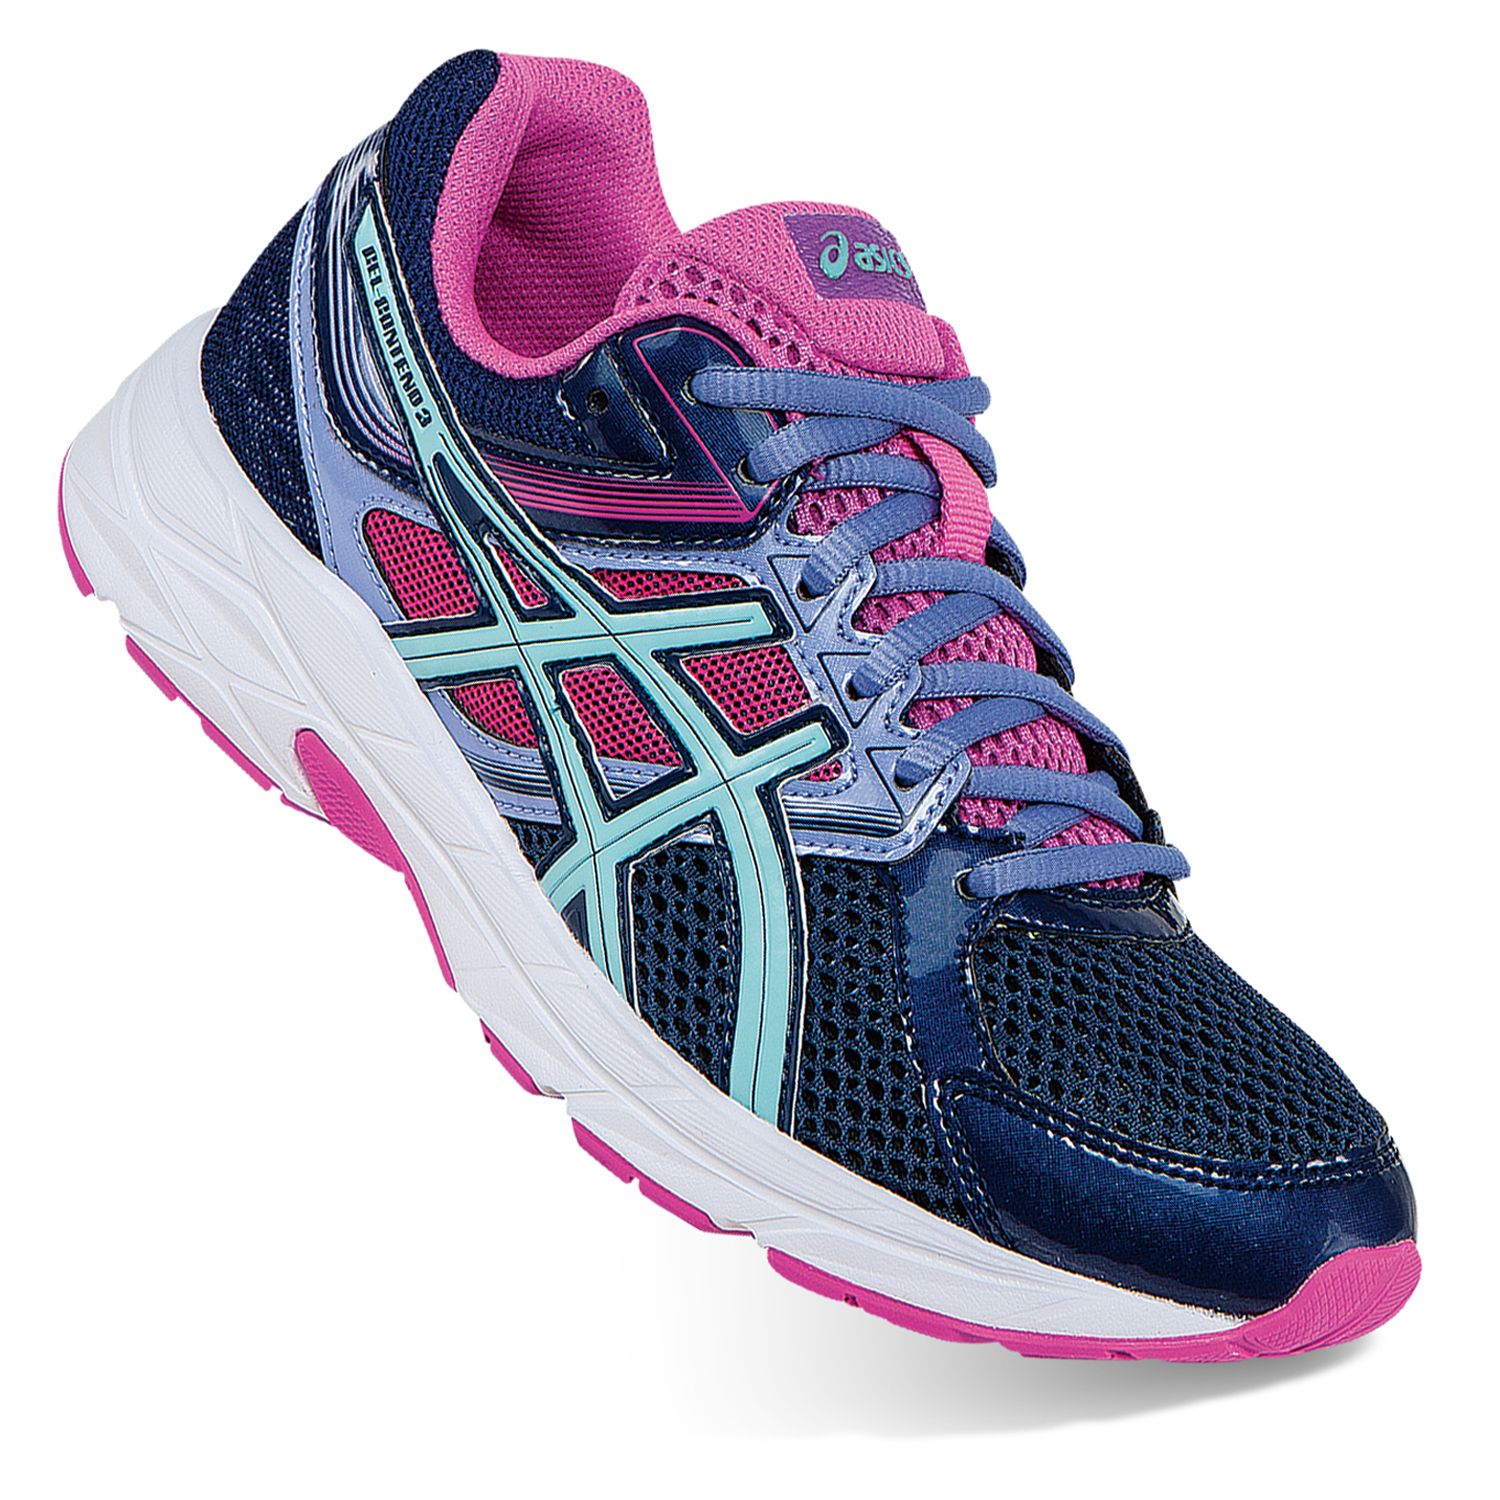 asics gel contend 3 shoes